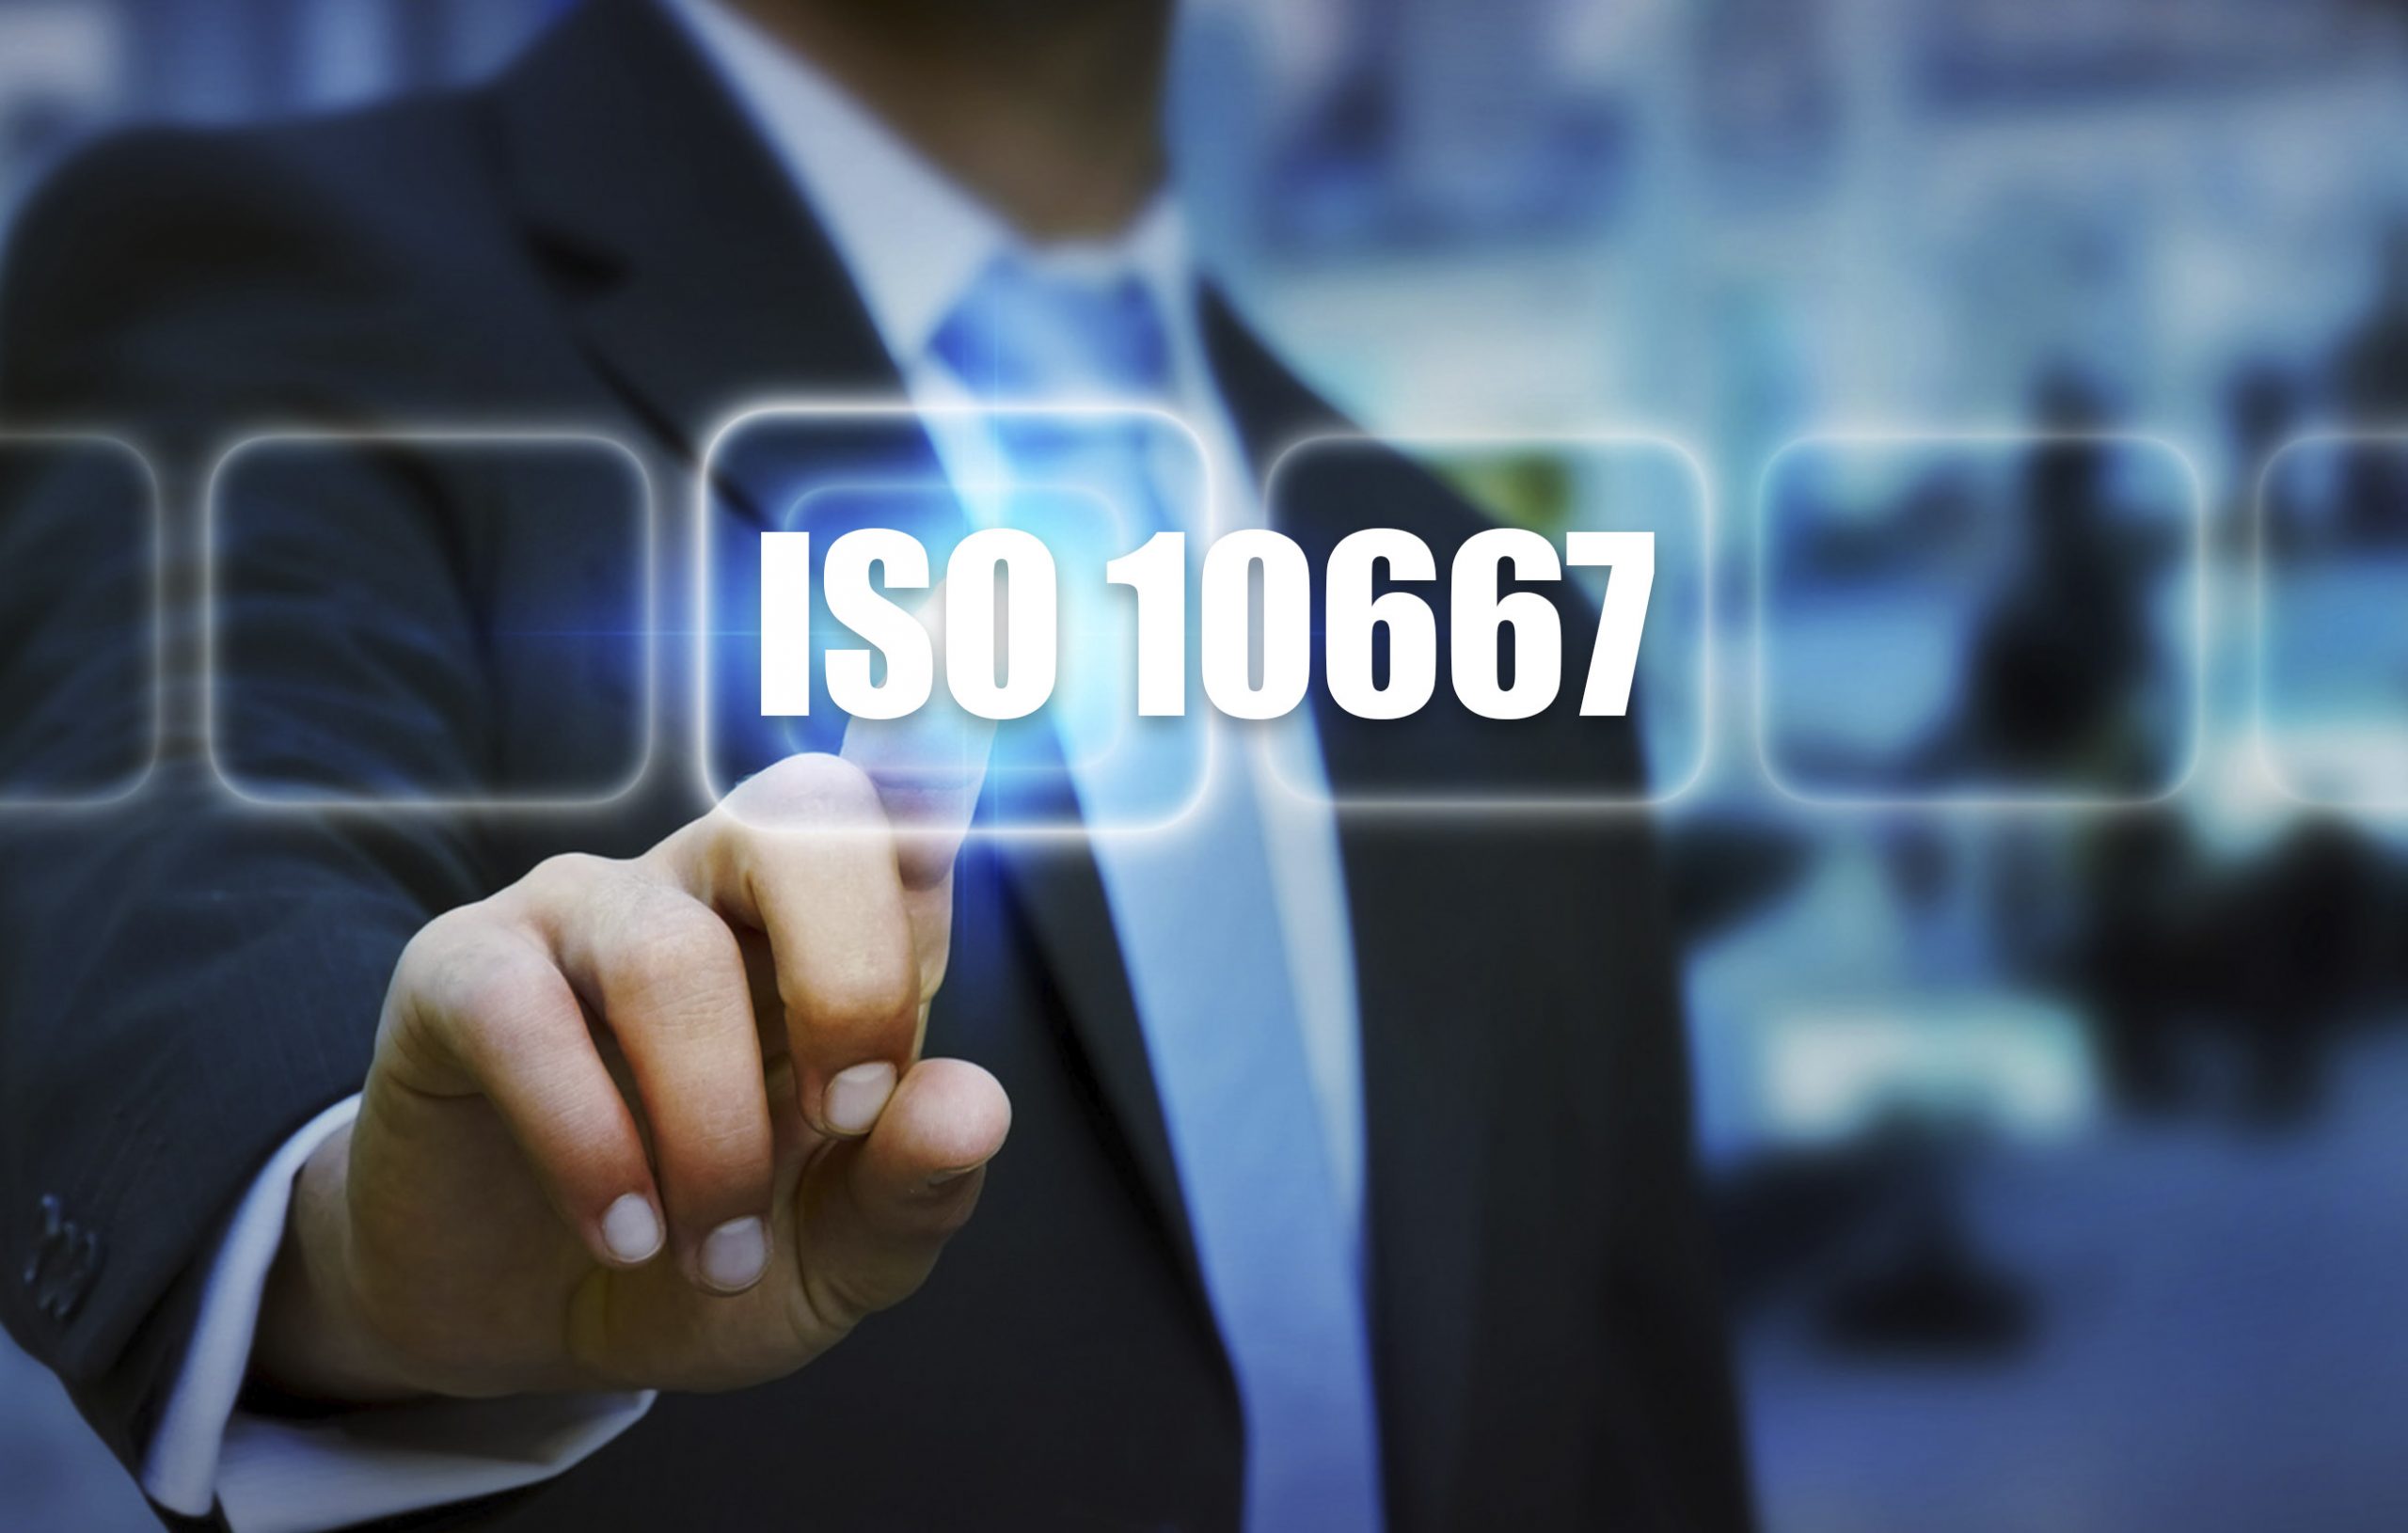 ISO10667_1